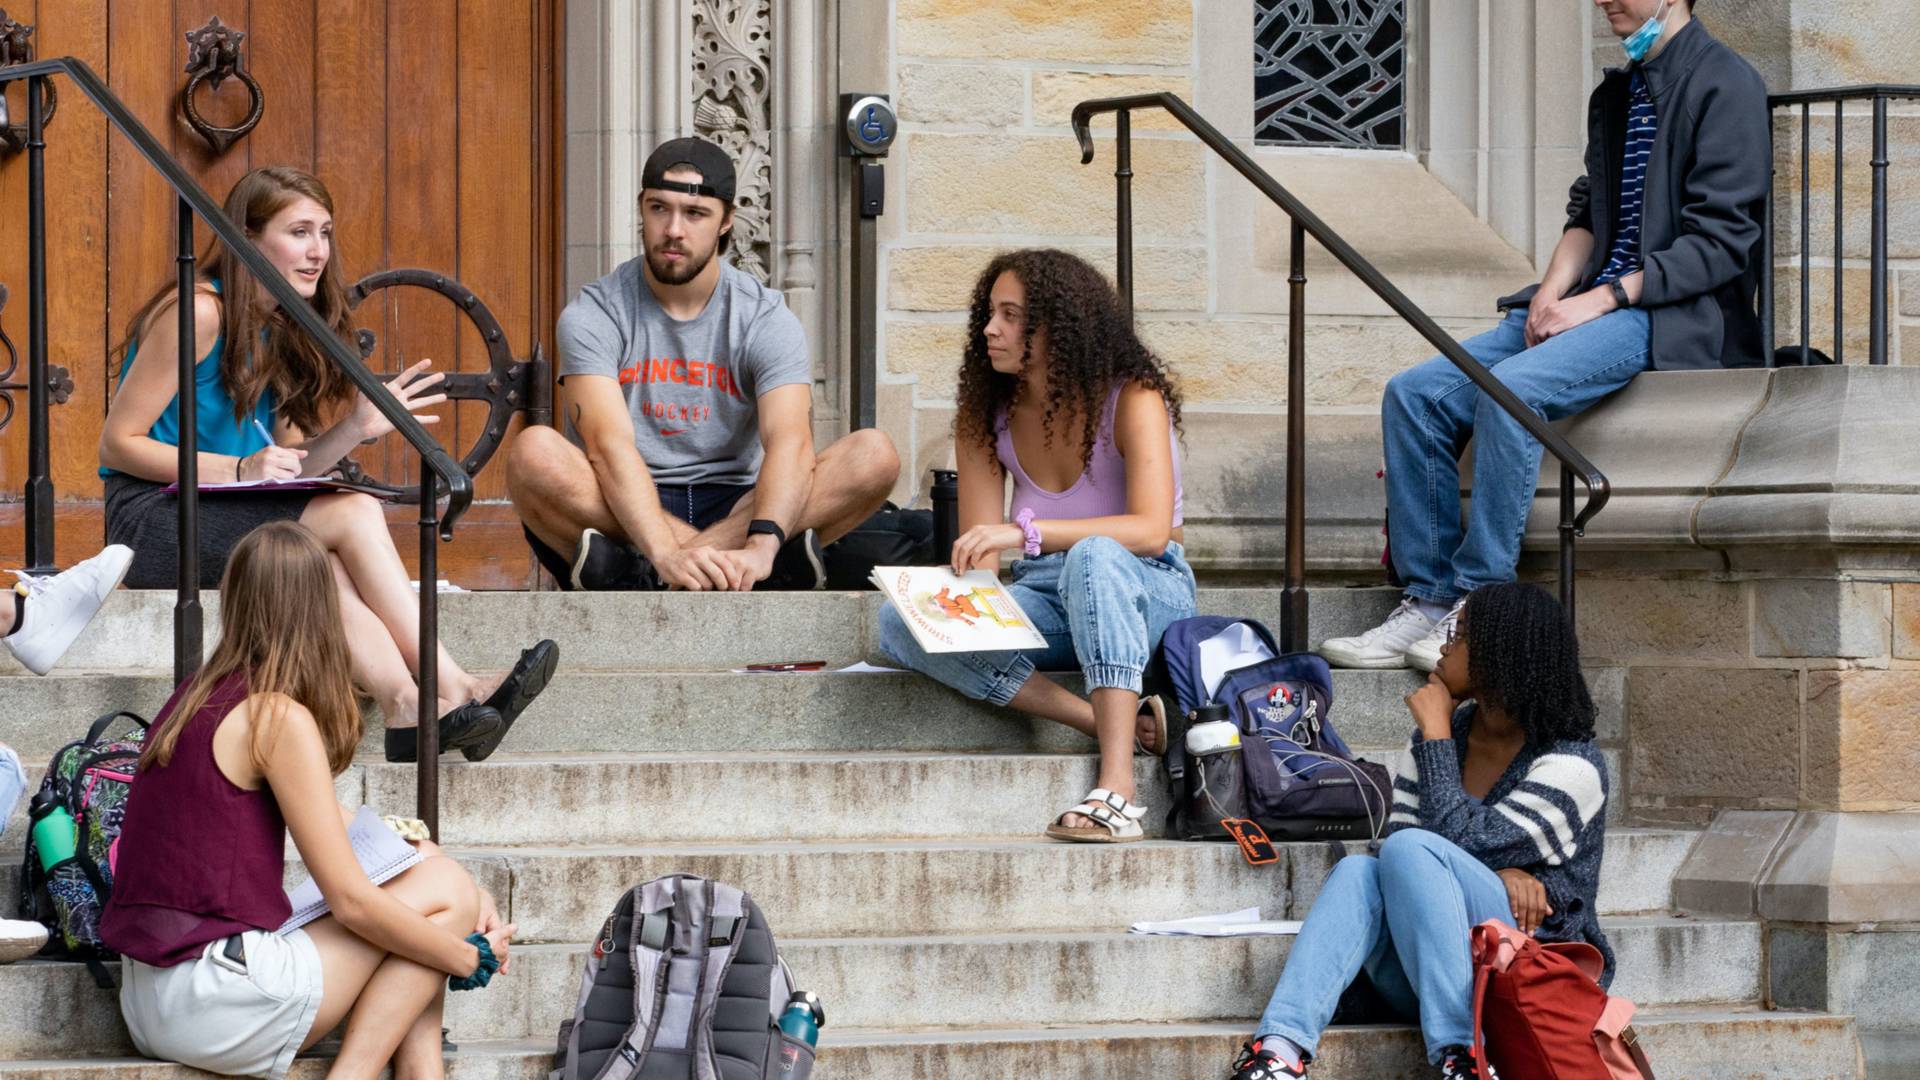 Students having a discussion on steps outside a building.